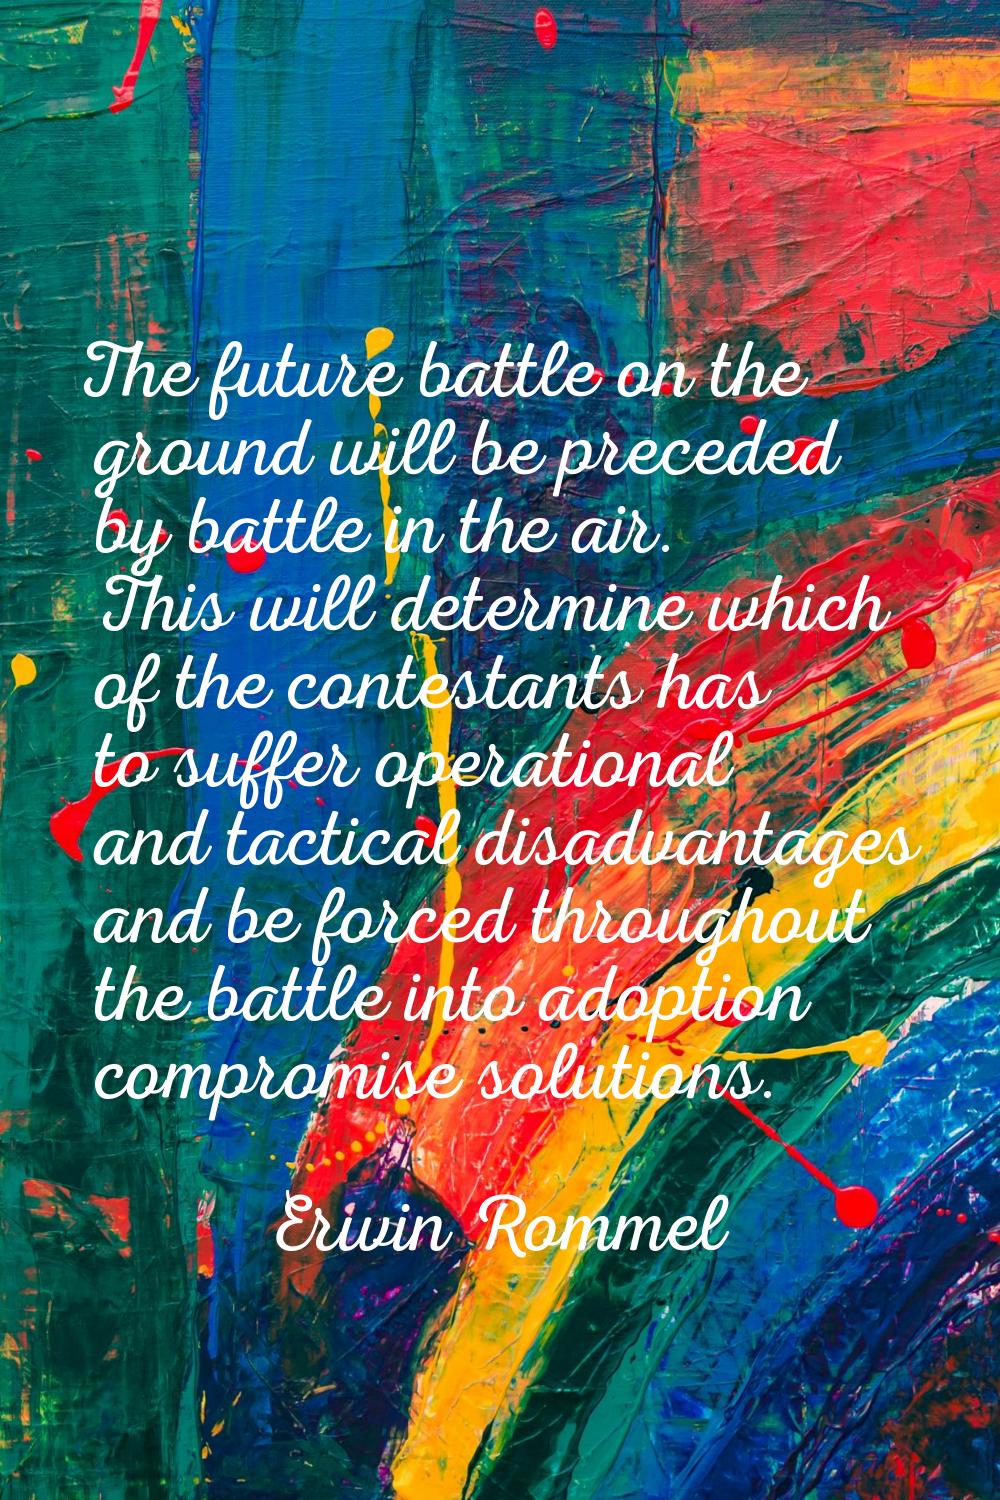 The future battle on the ground will be preceded by battle in the air. This will determine which of